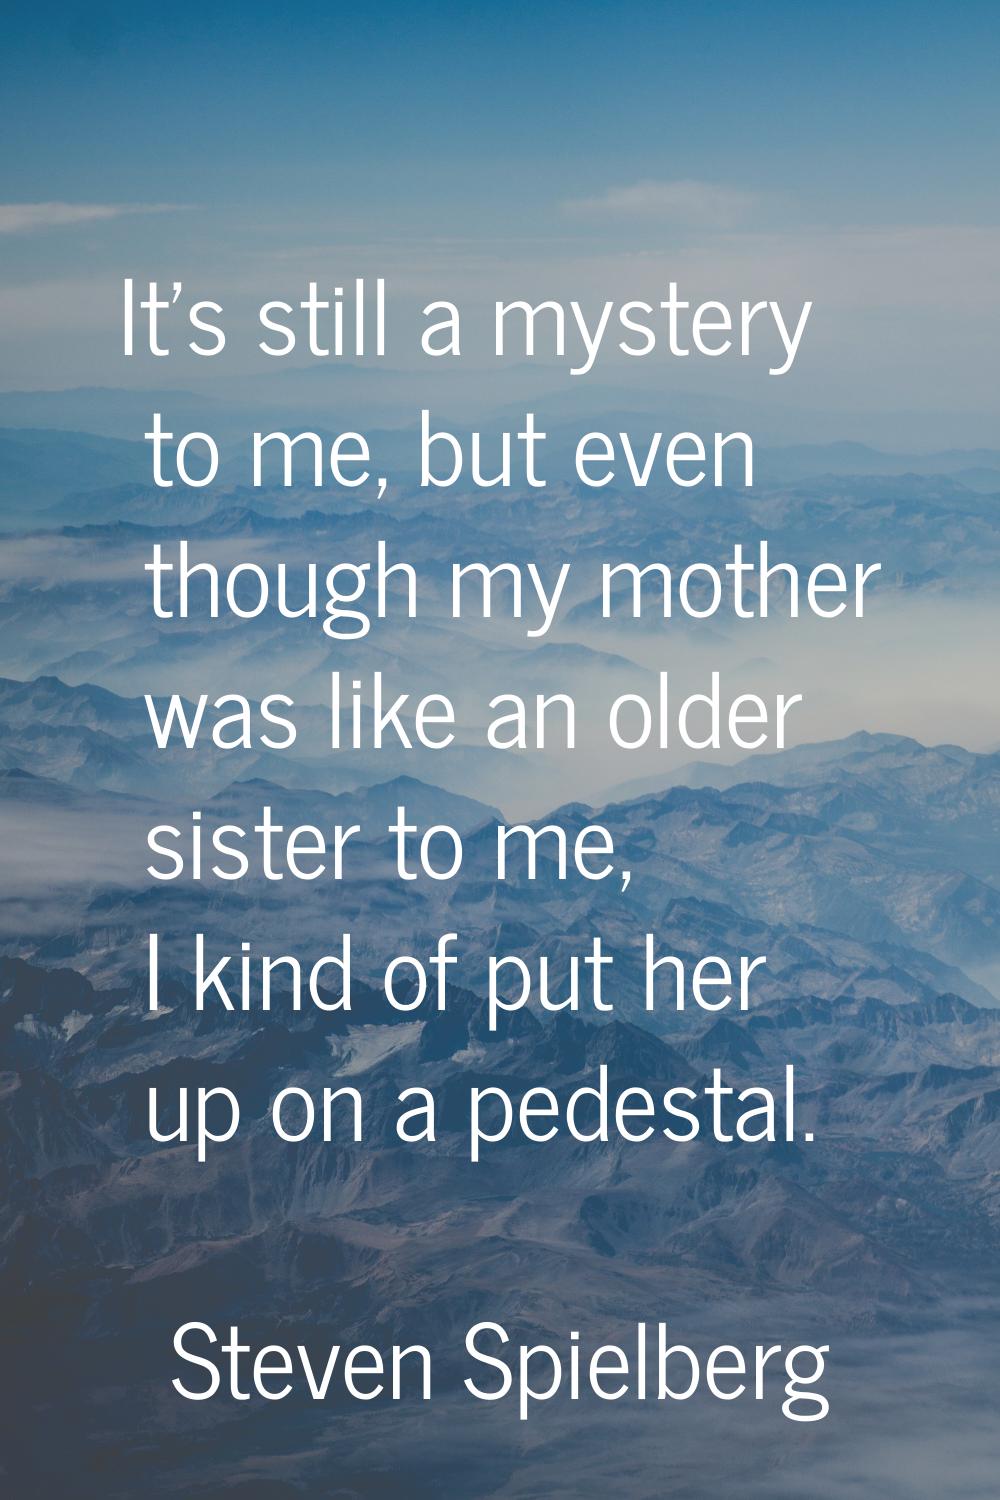 It's still a mystery to me, but even though my mother was like an older sister to me, I kind of put